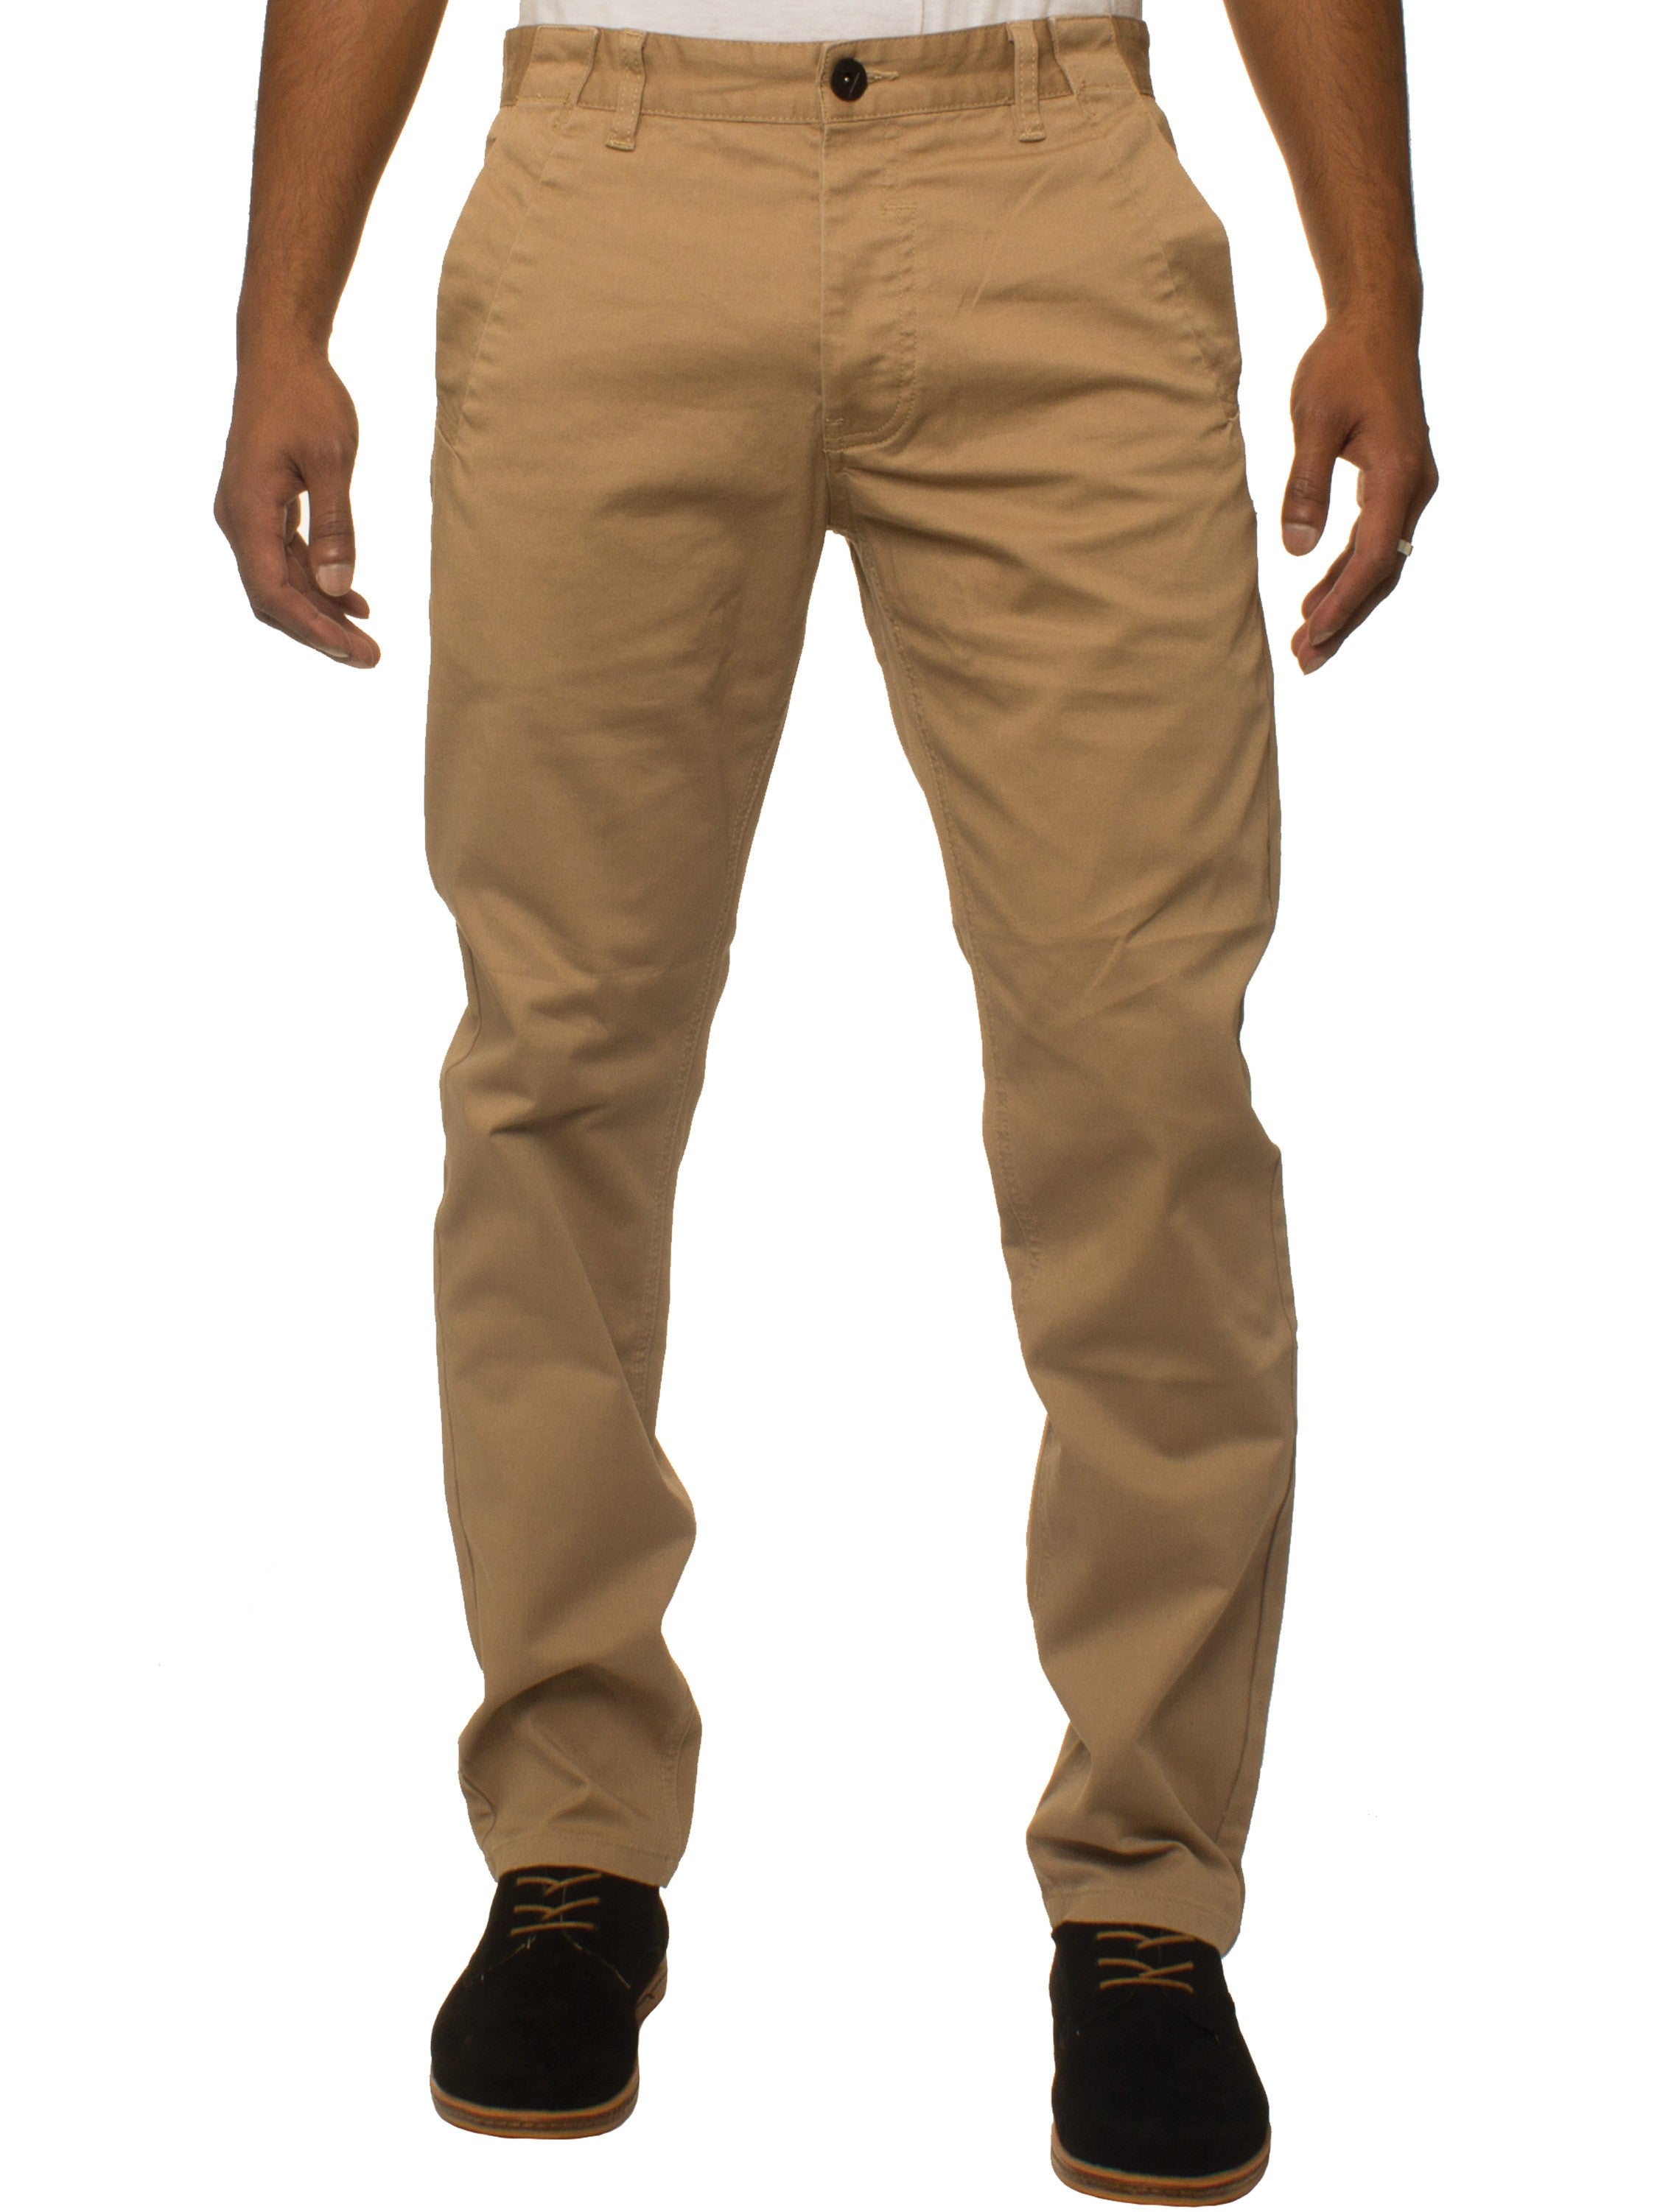 Mens Tapered Fit Stretch Pants By Eto Jeans - Spirit Clothing